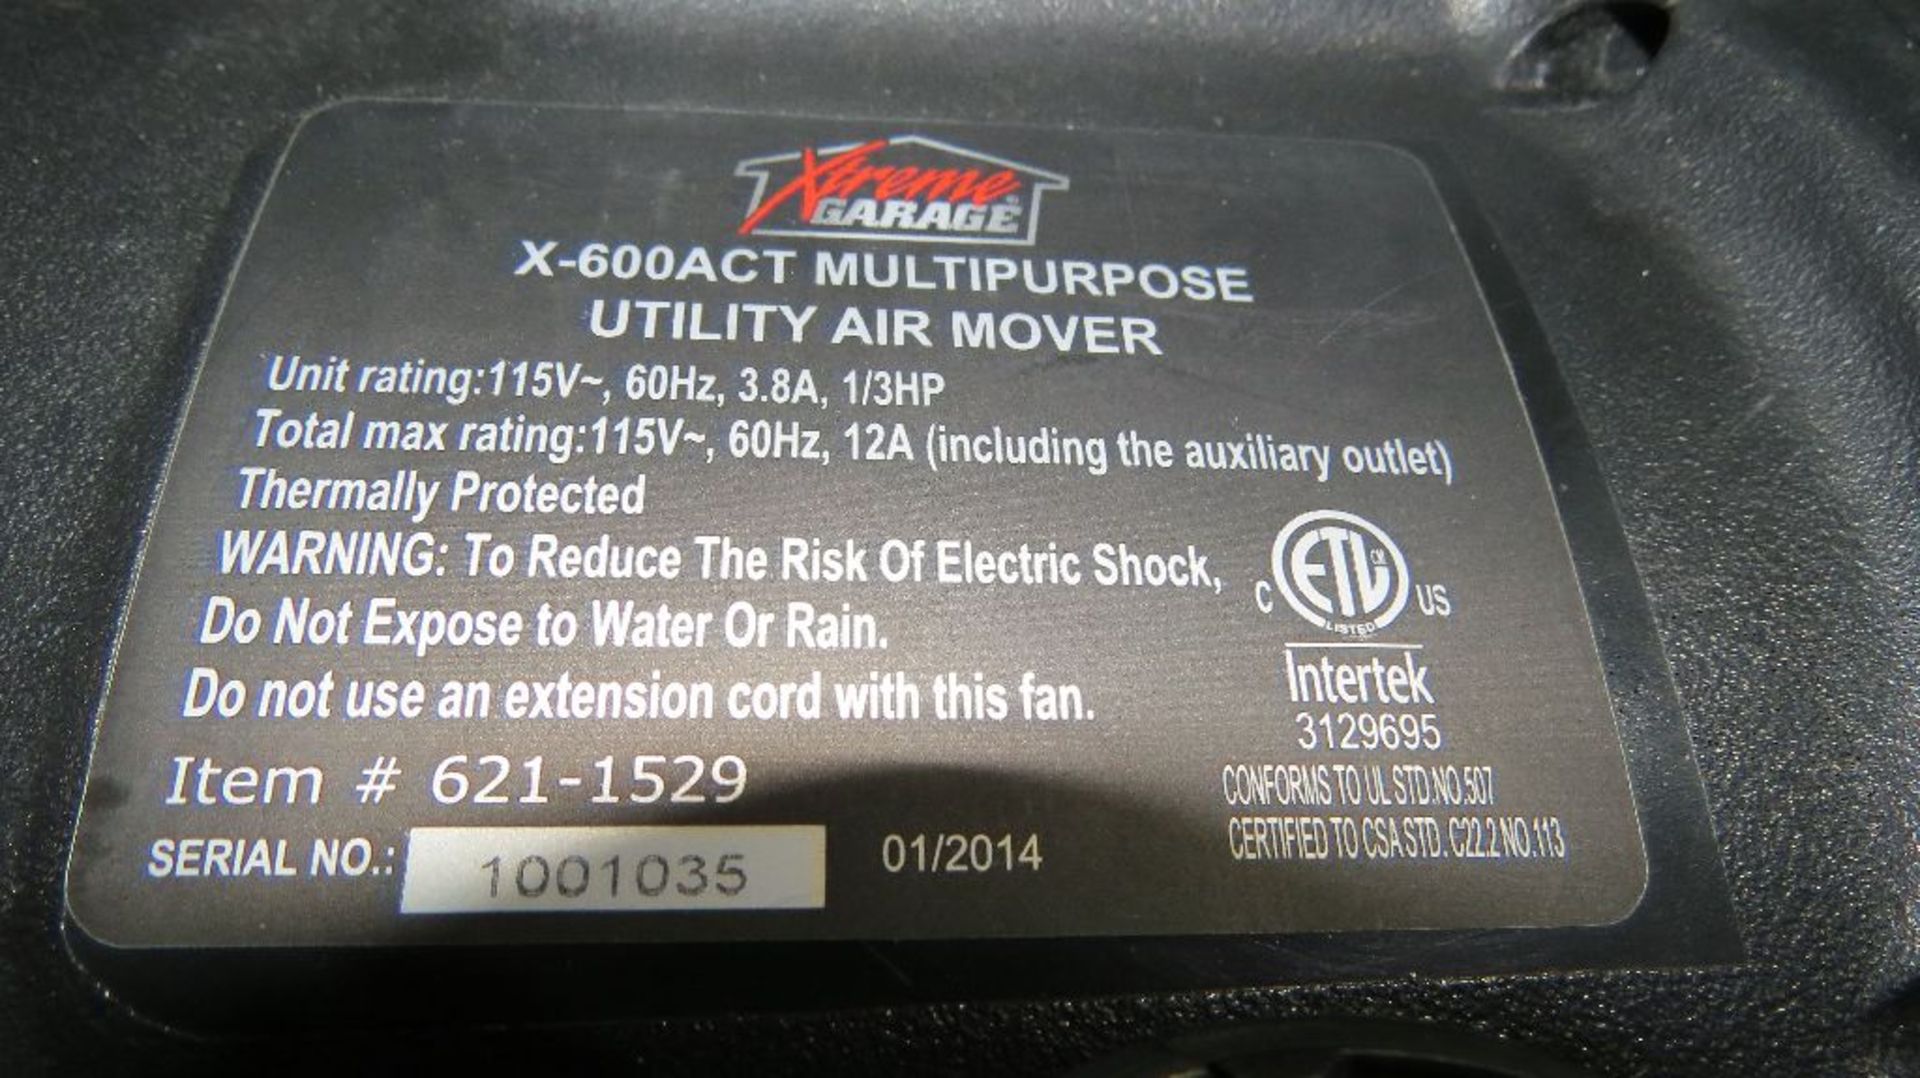 XTREME Garage air mover X-600ACT. - Image 4 of 4